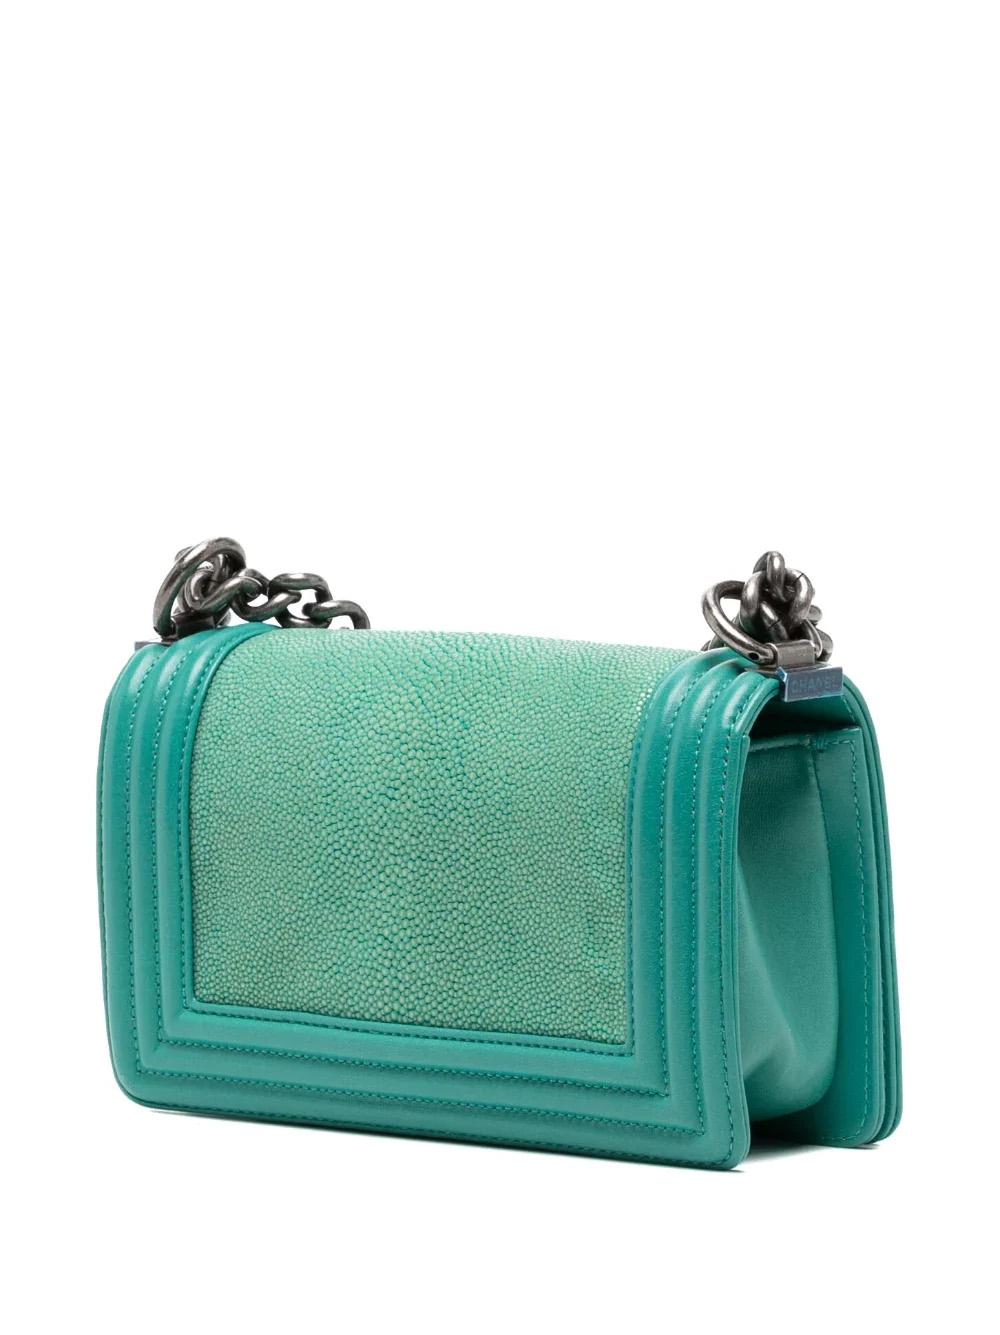 This Small Galuchat Boy Bag is a signature Chanel handbag crafted with 100% leather. Its turquoise blue-green colour is complemented by a shagreen and lambskin finish, featuring a signature gourmet-chain shoulder strap, a front flap closure, a